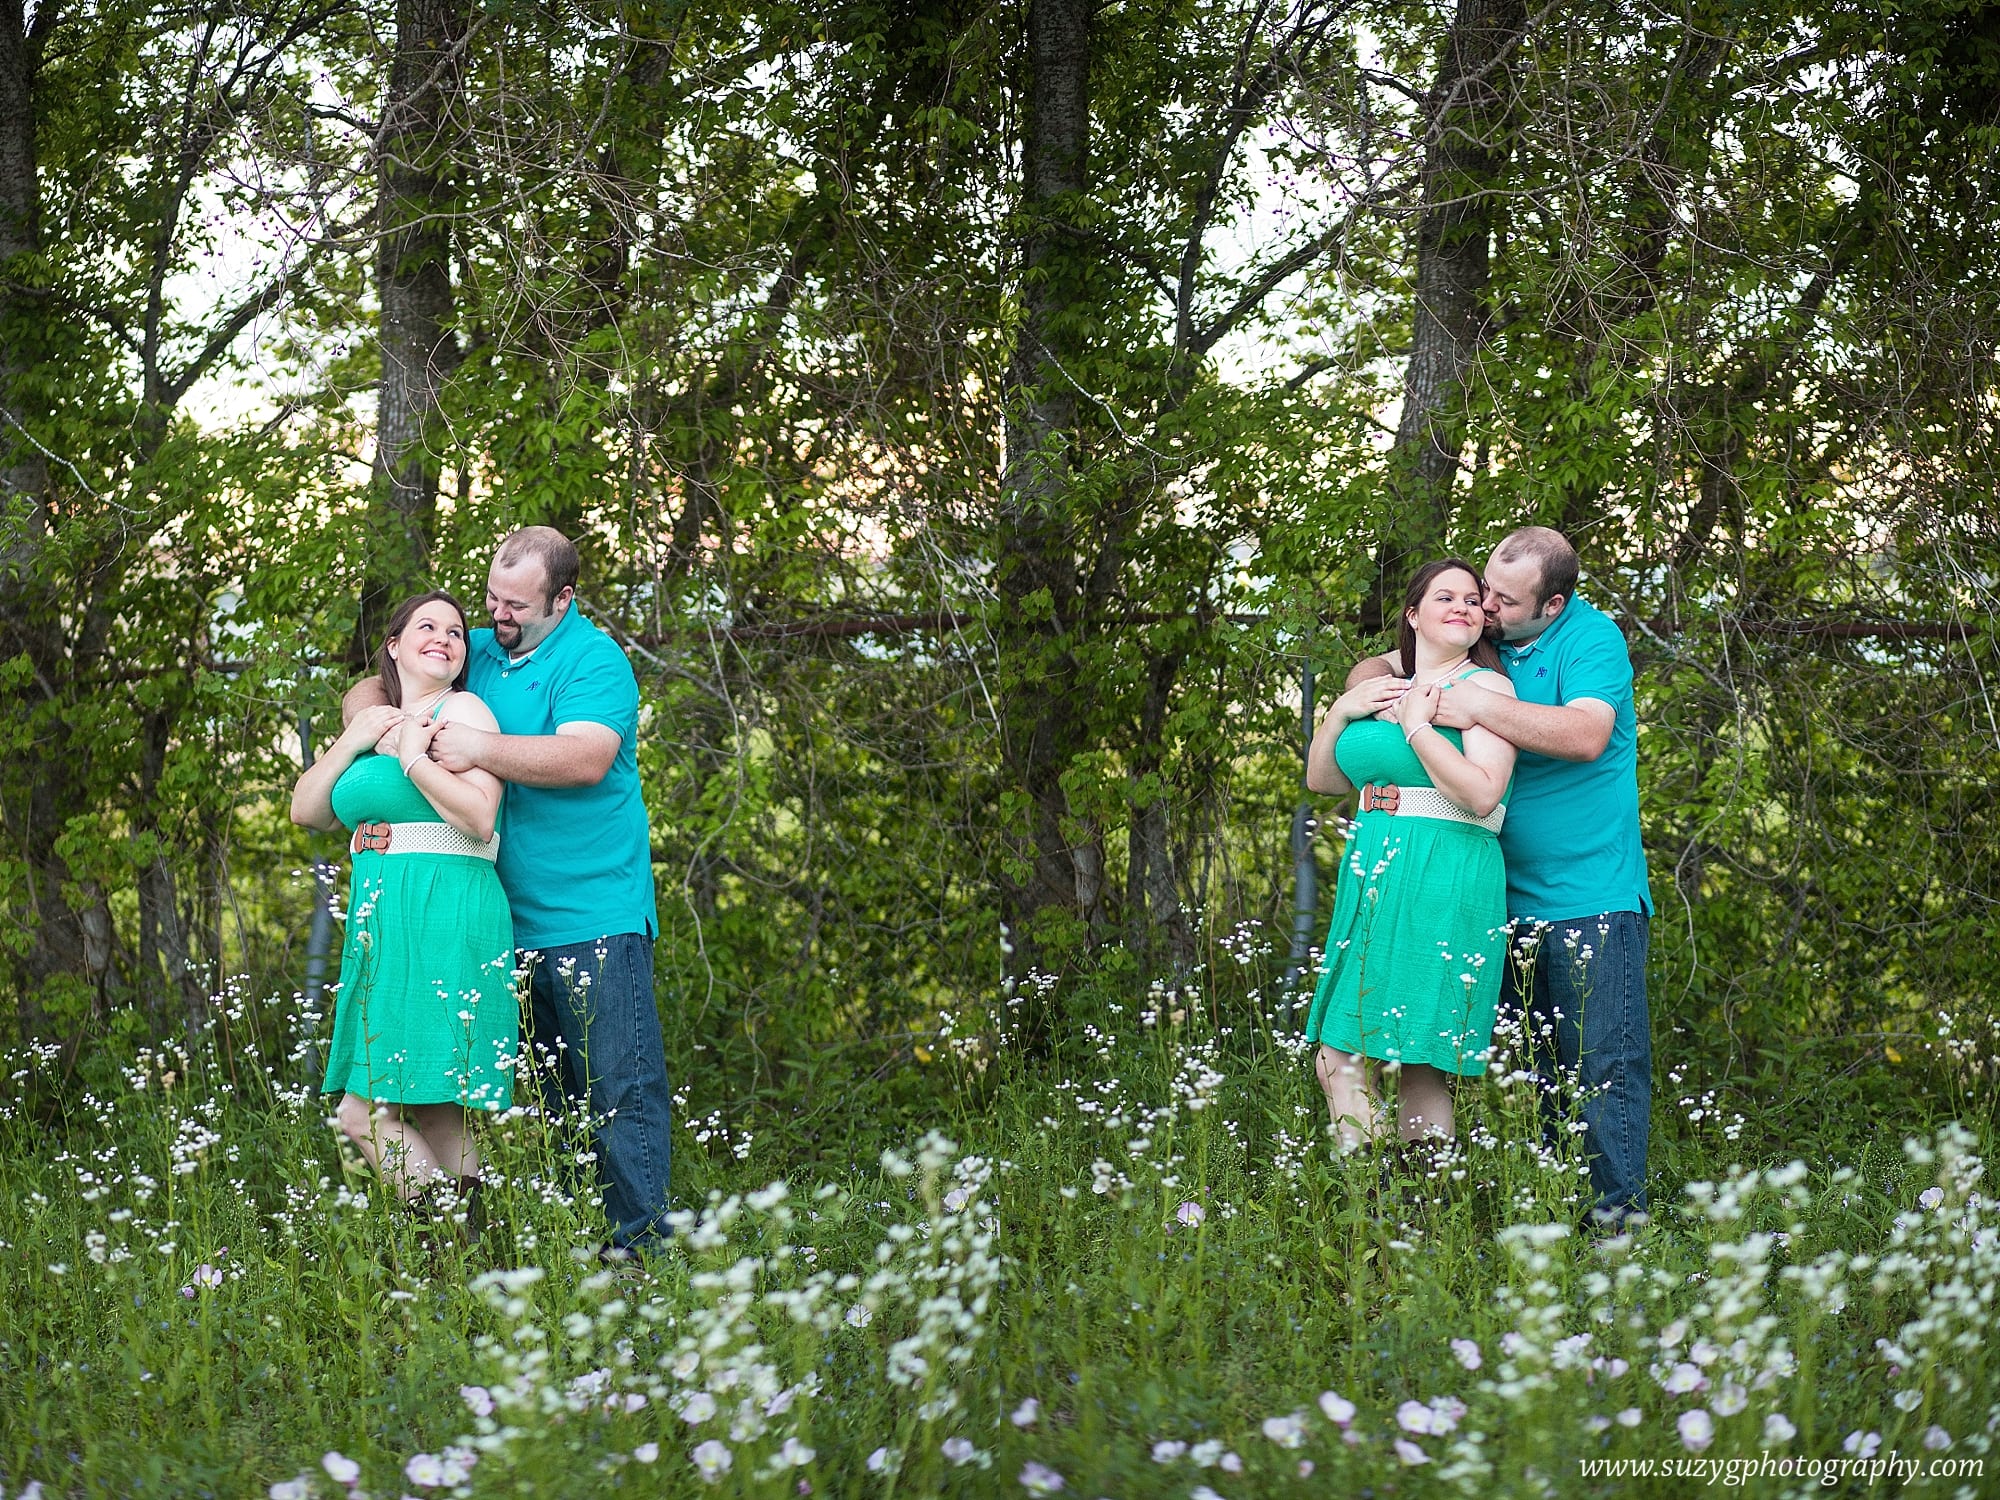 engagements-new orleans-texas-baton rouge-lake charles-suzy g-photography-suzygphotography_0039